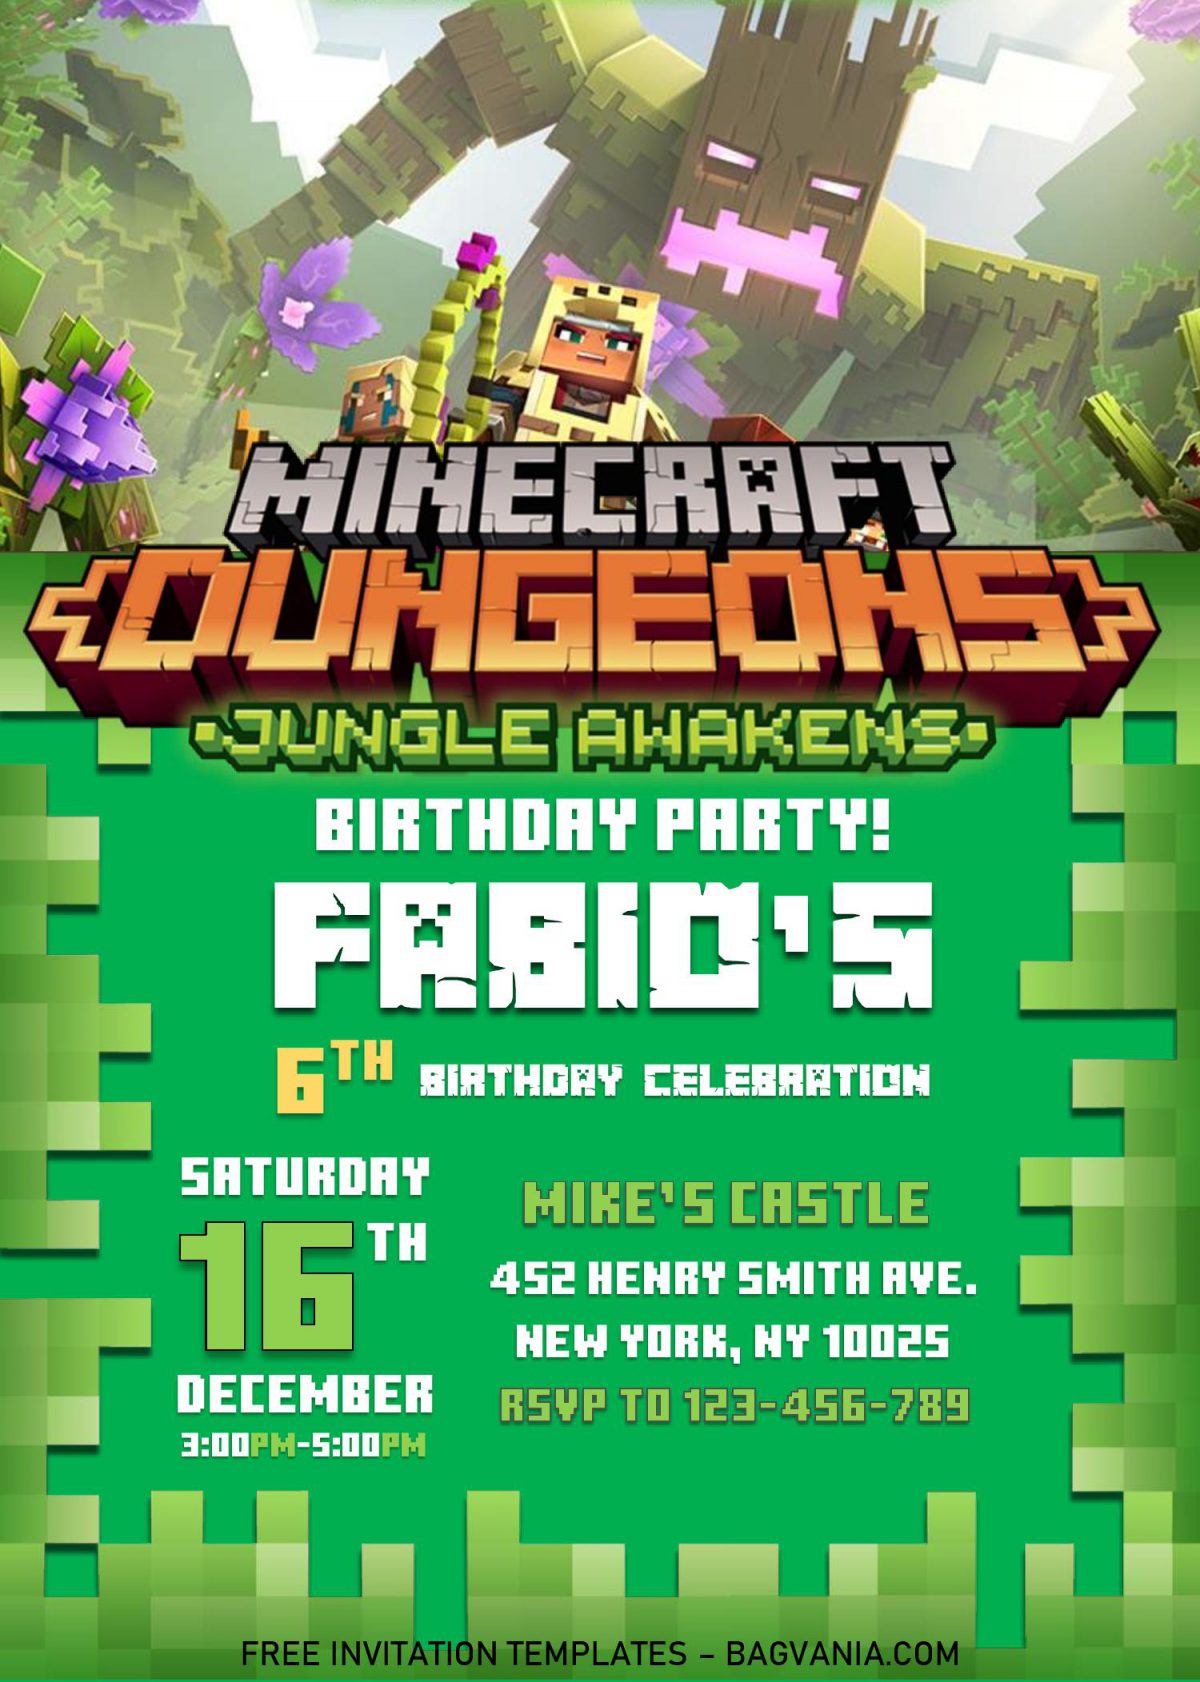 Minecraft Birthday Invitation Templates - Editable With MS Word and has pixel border